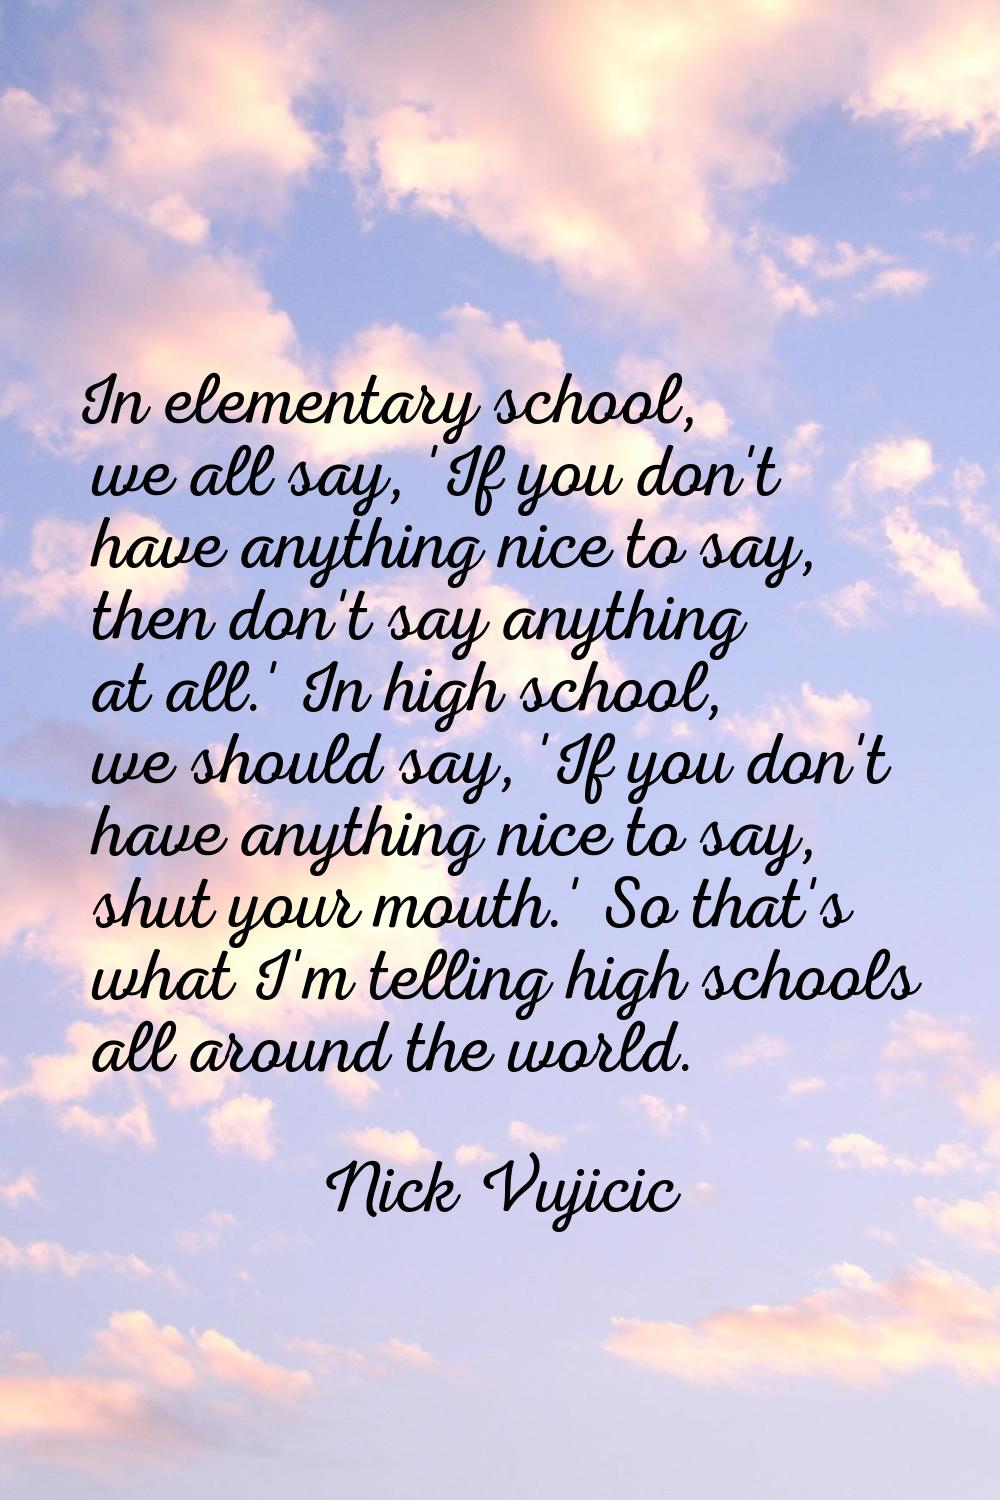 In elementary school, we all say, 'If you don't have anything nice to say, then don't say anything 